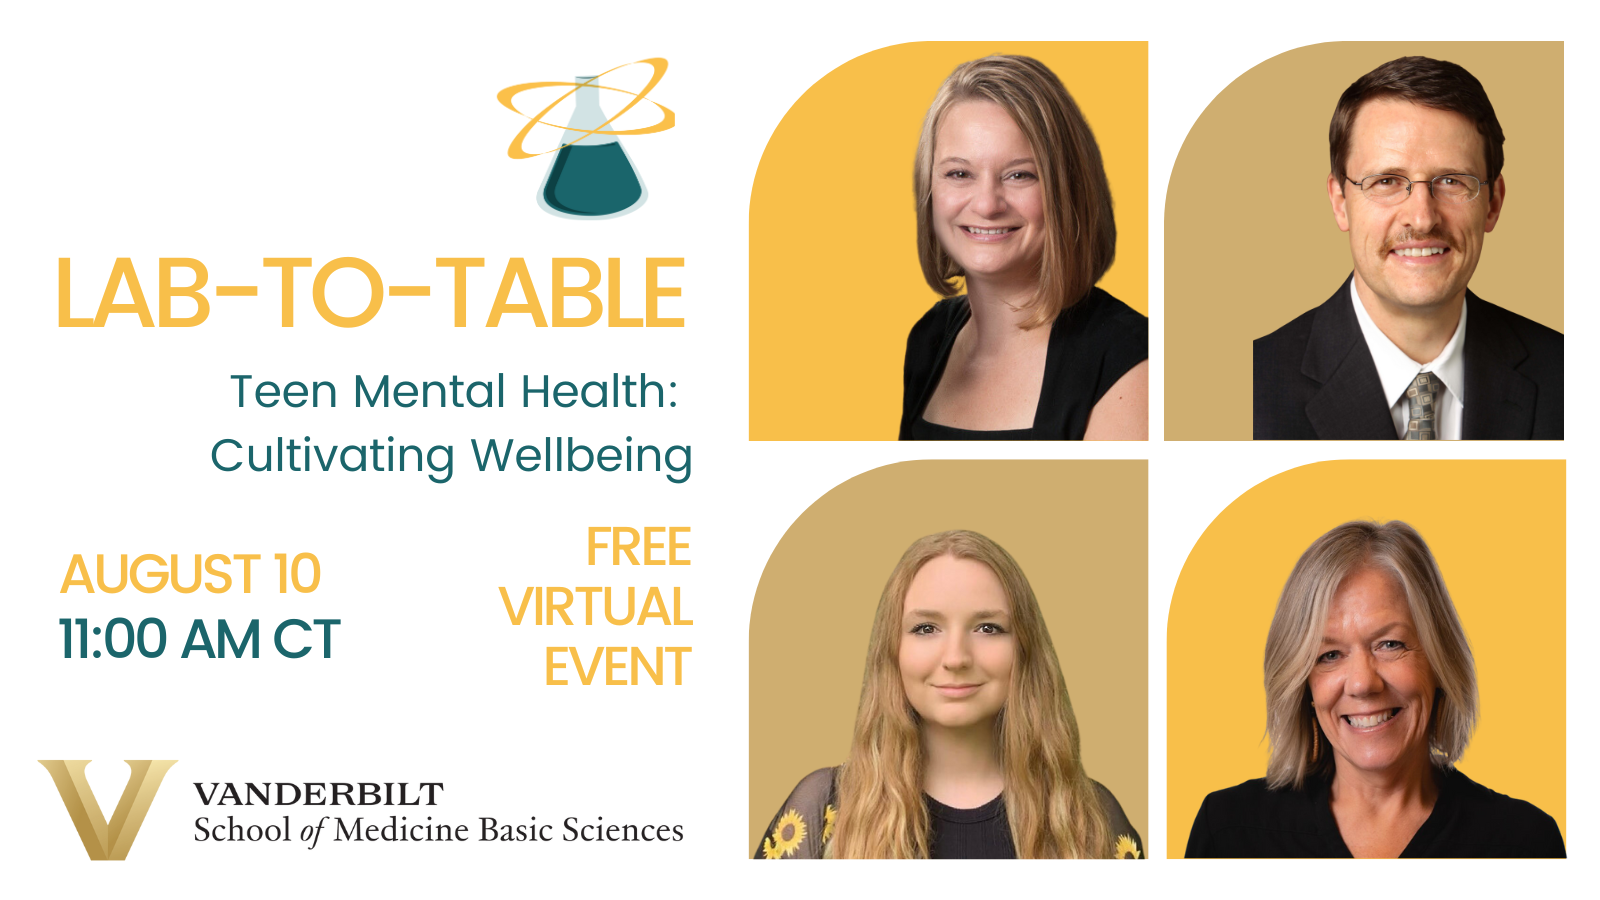 Lab-to-Table Conversation: ‘Teen Mental Health: Cultivating Wellbeing’ is Aug. 10